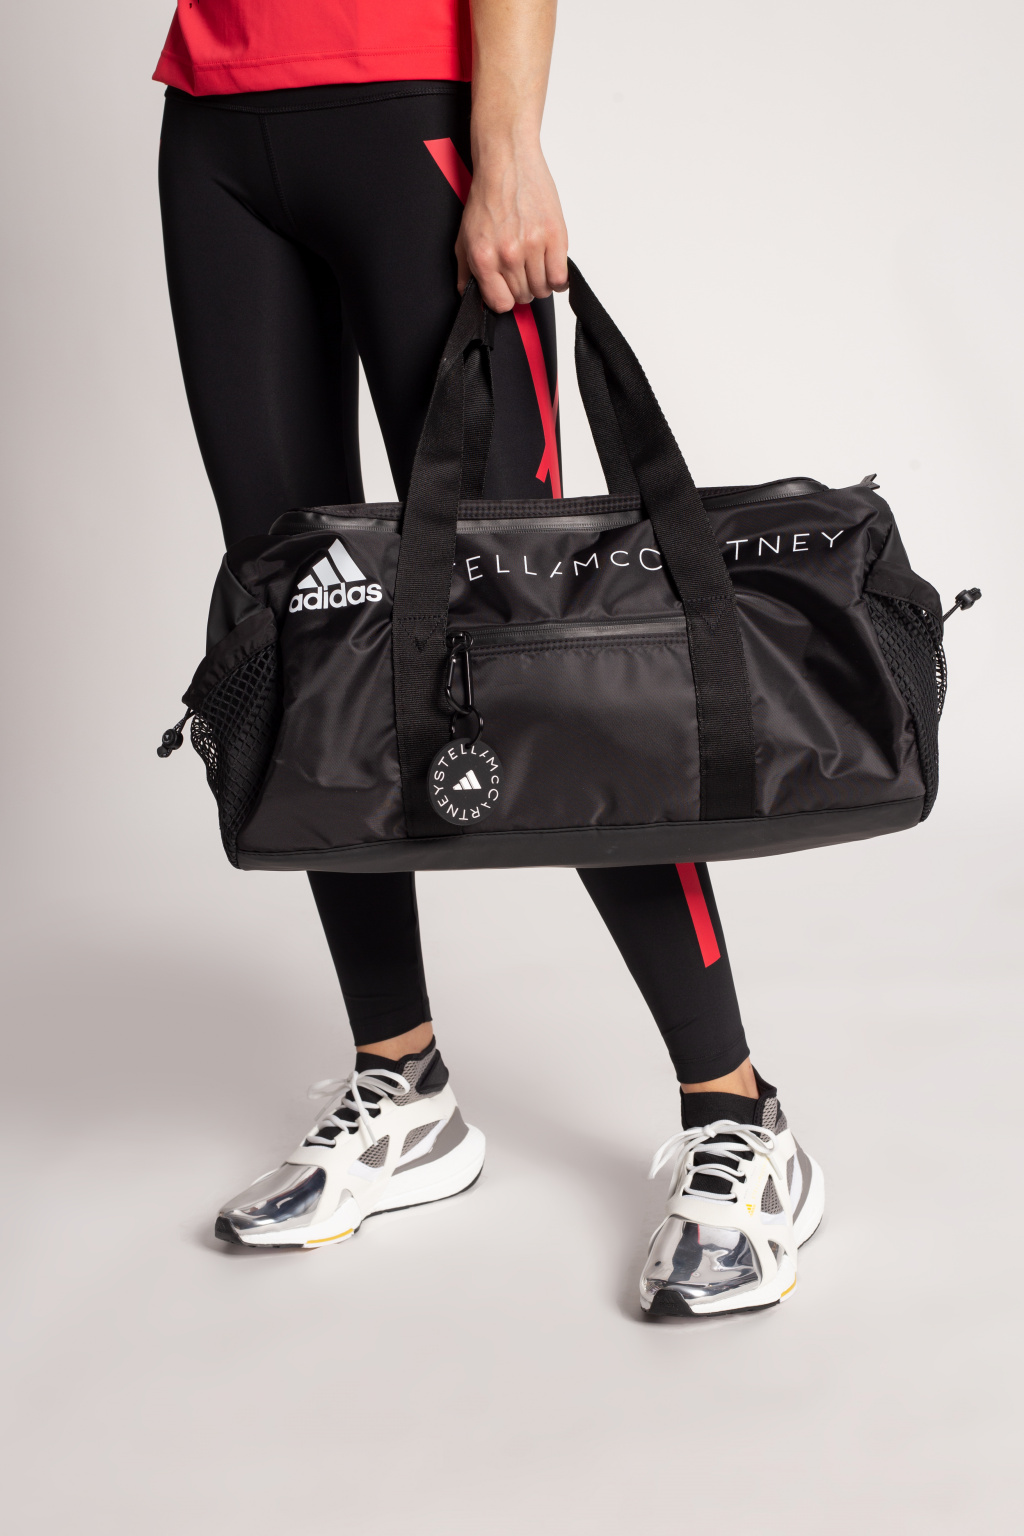 ADIDAS by Stella McCartney adidas moves for her target by mail account